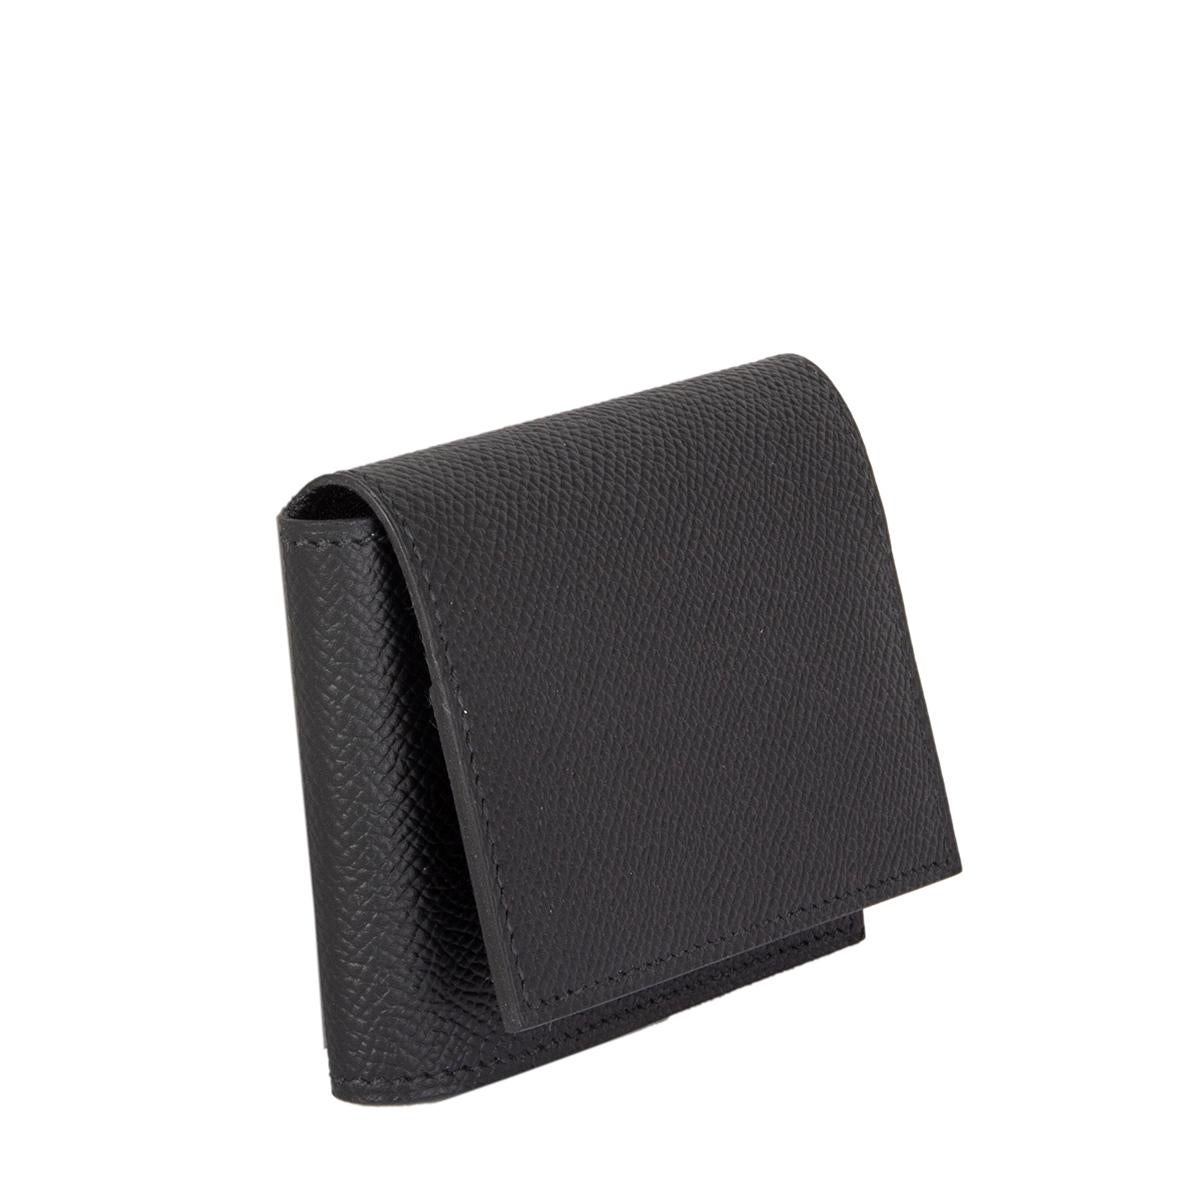 Hermes 'Guernesey' credit card wallet in Noir (black) Veau Epsom leather. Trifold with three pockets for credit cards. Brand new. Comes with box.

Width 9cm (3.5in)
Height 6cm (2.3in)
